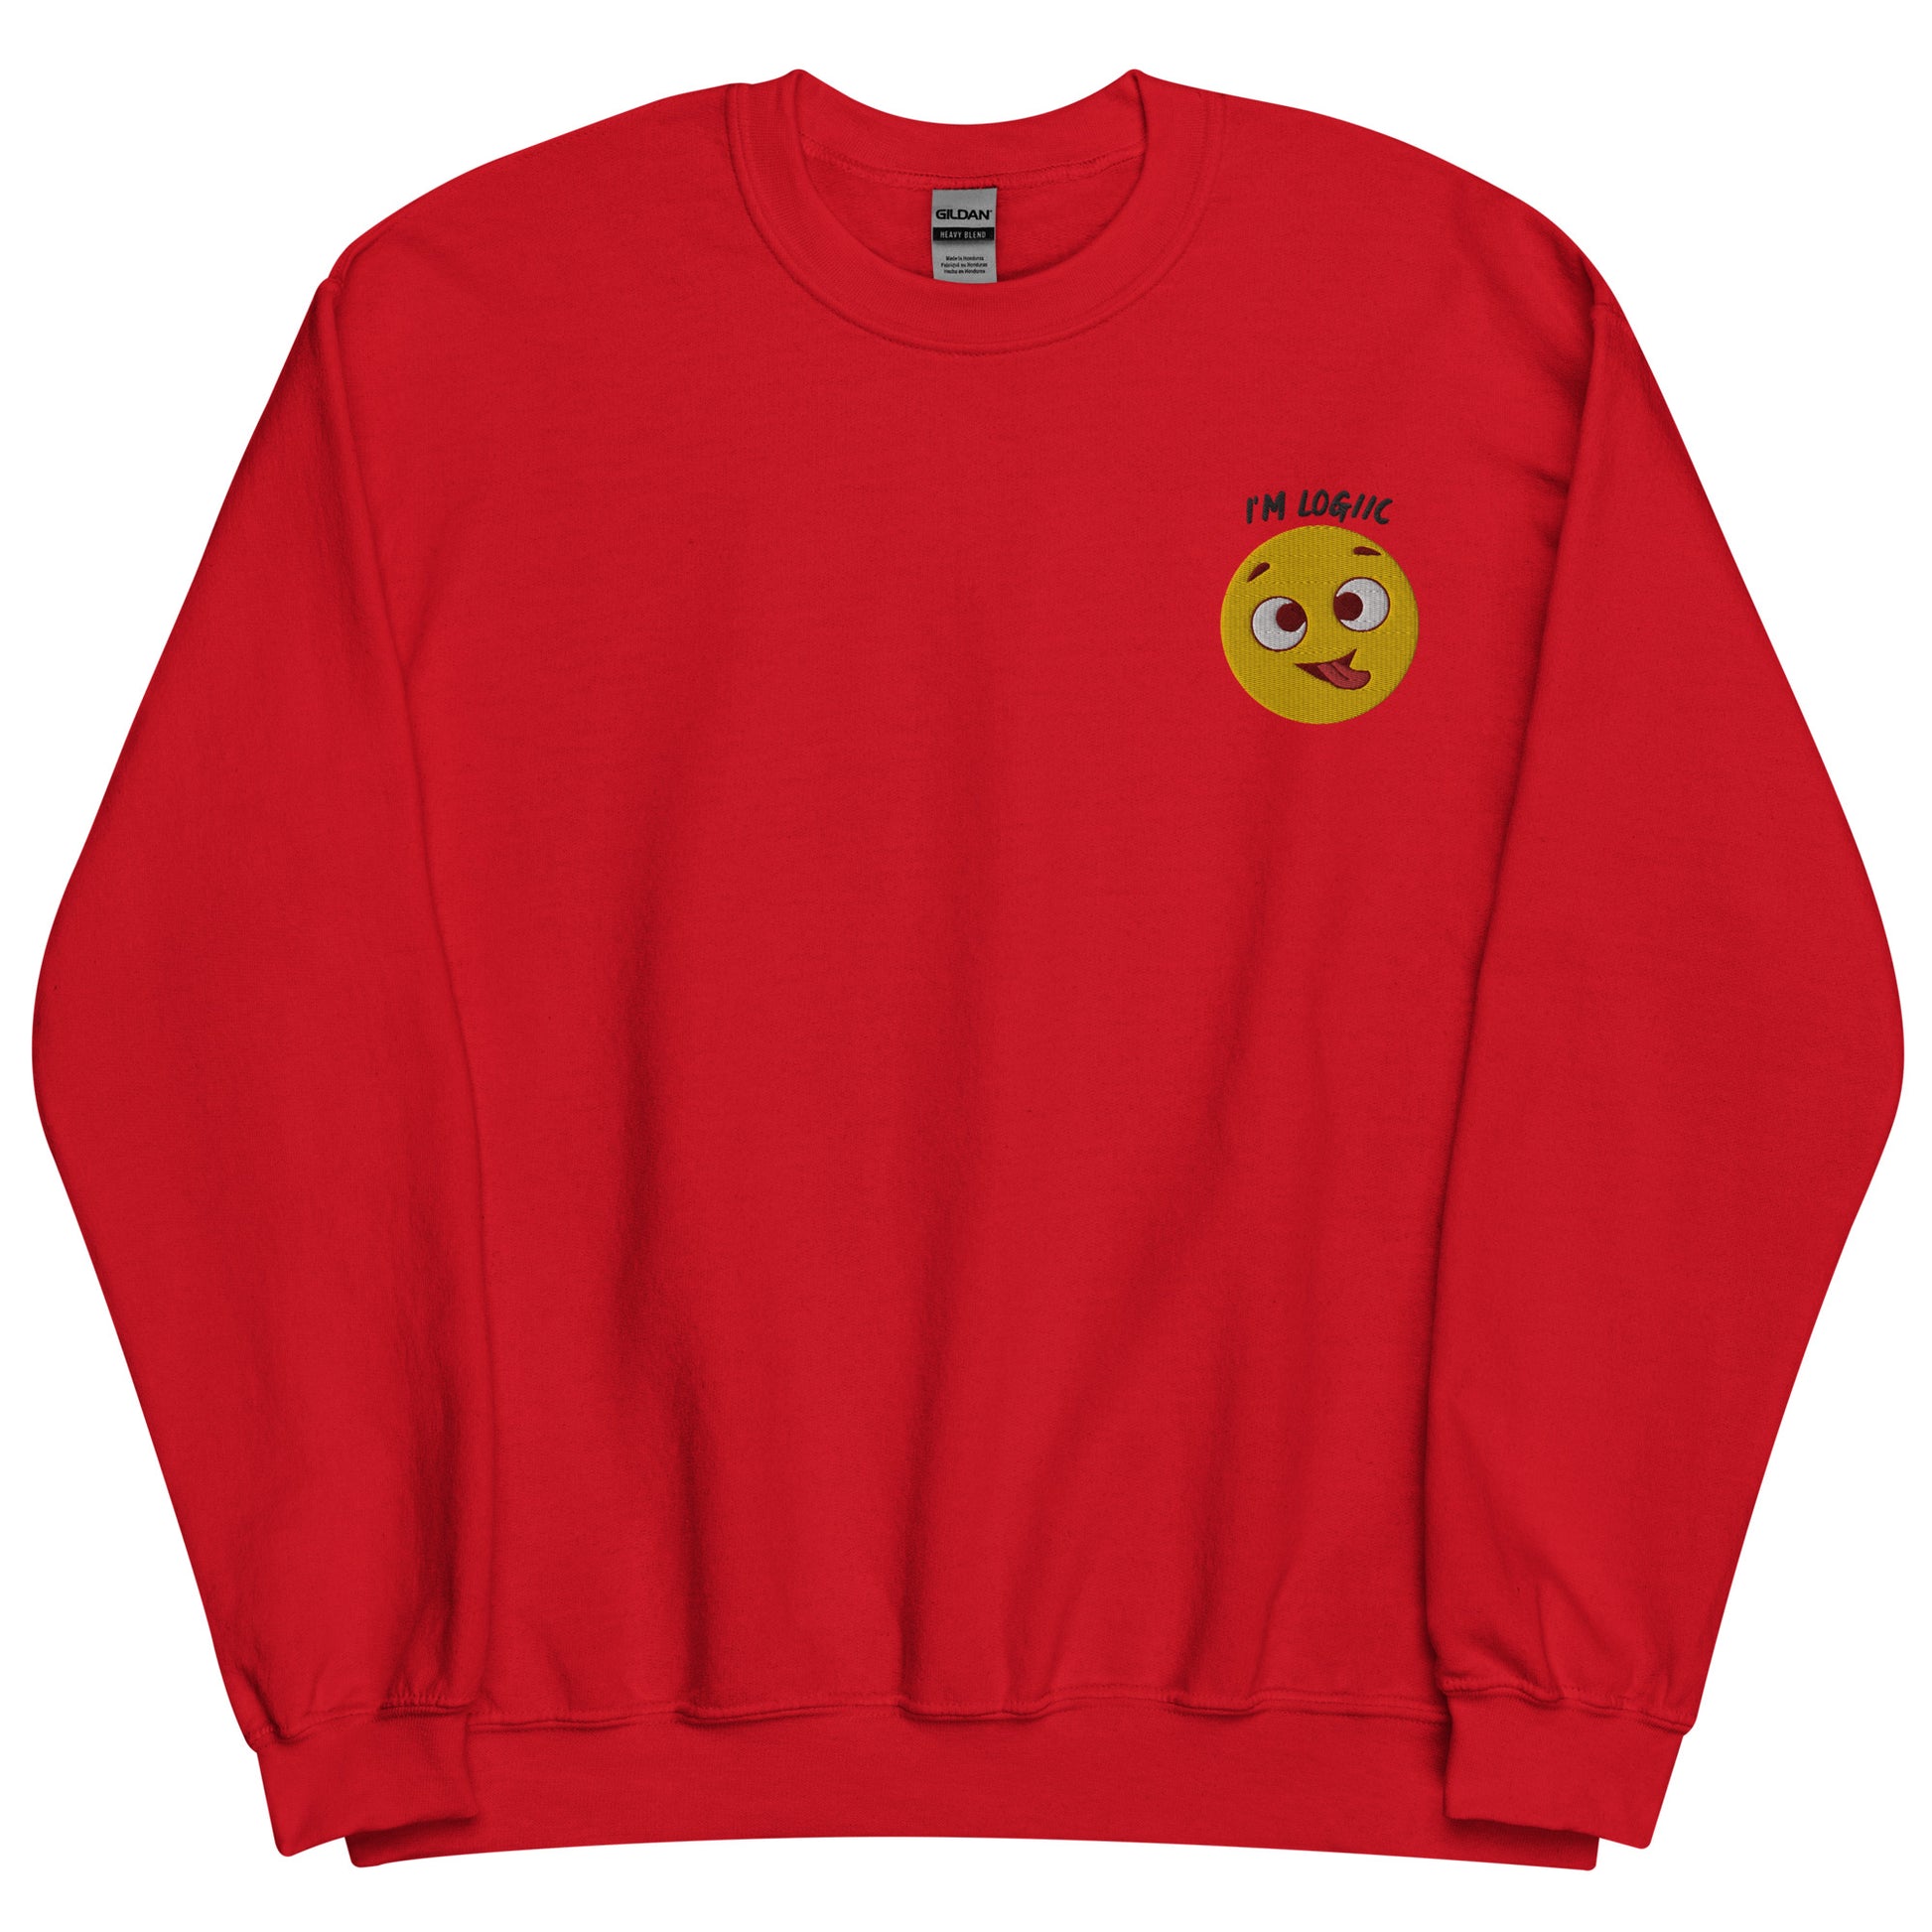 Silly Face Unisex Sweatshirt - Red / S